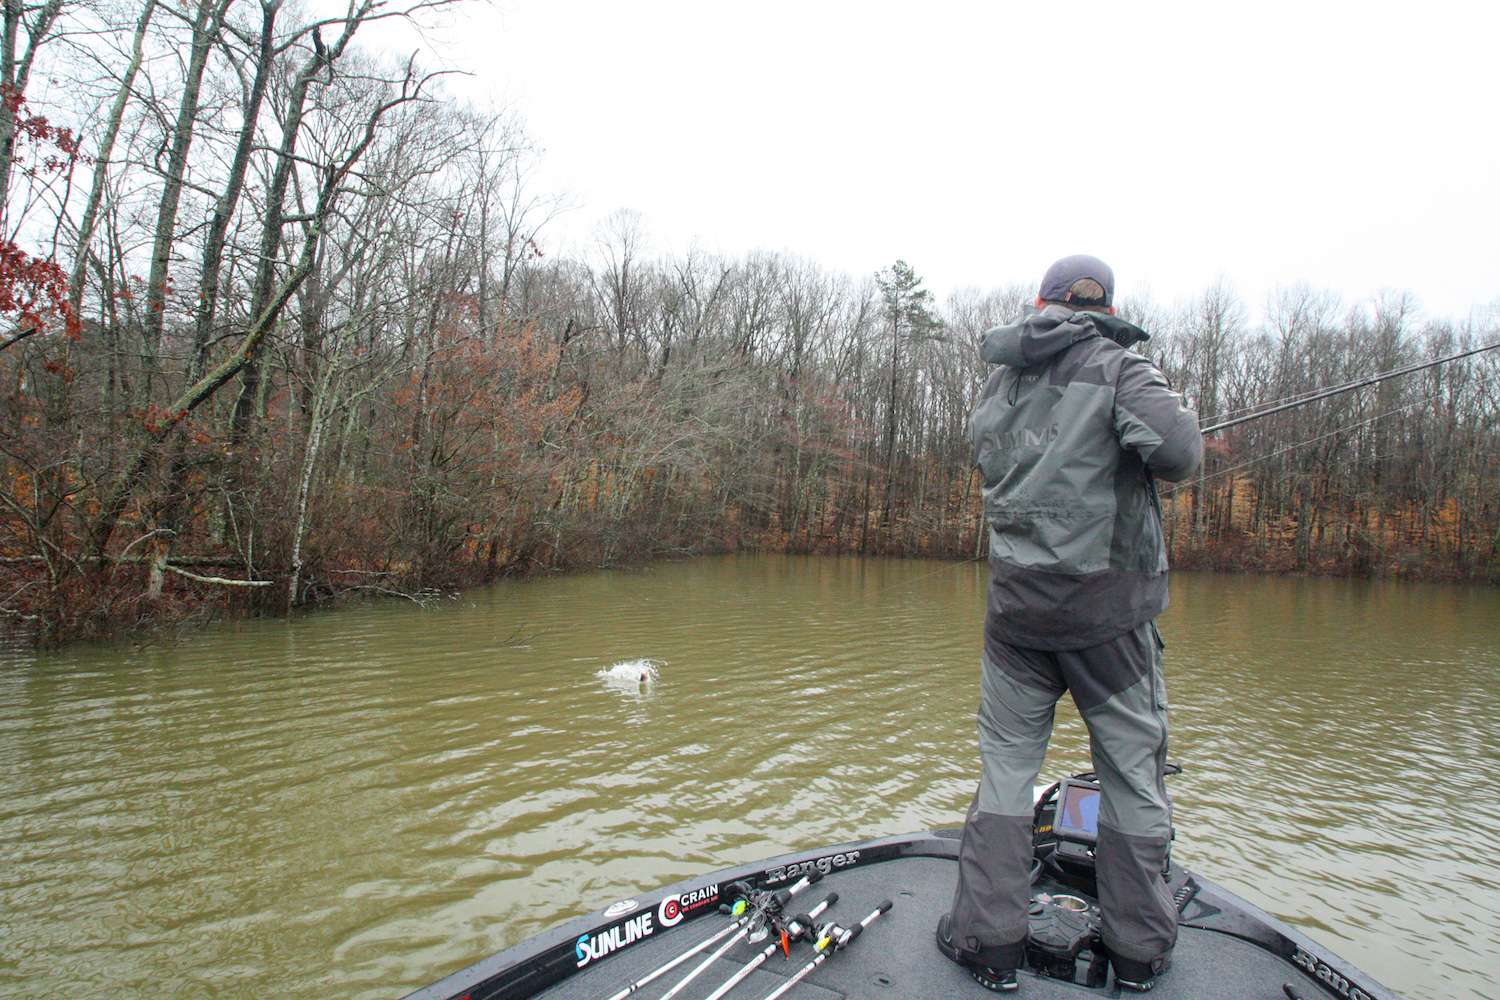 <b>10:25 a.m.</b> Frazier catches his fourth keeper, 1 pound, 5 ounces, on the bladed jig. âThis guy hit way off the bank.â <br>
<b>10:32 a.m.</b> Frazier runs the buzzbait across a series of laydown trees. <br>
<b>10:44 a.m.</b> He pitches the jig to a submerged log. <br>
<b>10:48 a.m.</b> Frazier casts the bladed jig around another flooded island. <br>
<b>10:55 a.m.</b> Frazier makes a short hop back to the island where he caught his third keeper and fishes the opposite side with the bladed jig.
<p>
<b>3 HOURS LEFT</b><br>
<b>11:03 a.m.</b> A bass taps the bladed jig. âSmall fish.â <br>
<b>11:13 a.m.</b> Frazier idles into another nearby cove and quickly hits several docks with the bladed jig. âSome guys love to fish docks. Iâm not one of them.â <br>
<b>11:20 a.m.</b> Frazier casts the bladed jig to a rock bank. âYouâd think theyâd be on these rocks, but thereâs absolutely no pattern to these fish. Itâs one here and one there. Fast-rising water can destabilize everything.â
